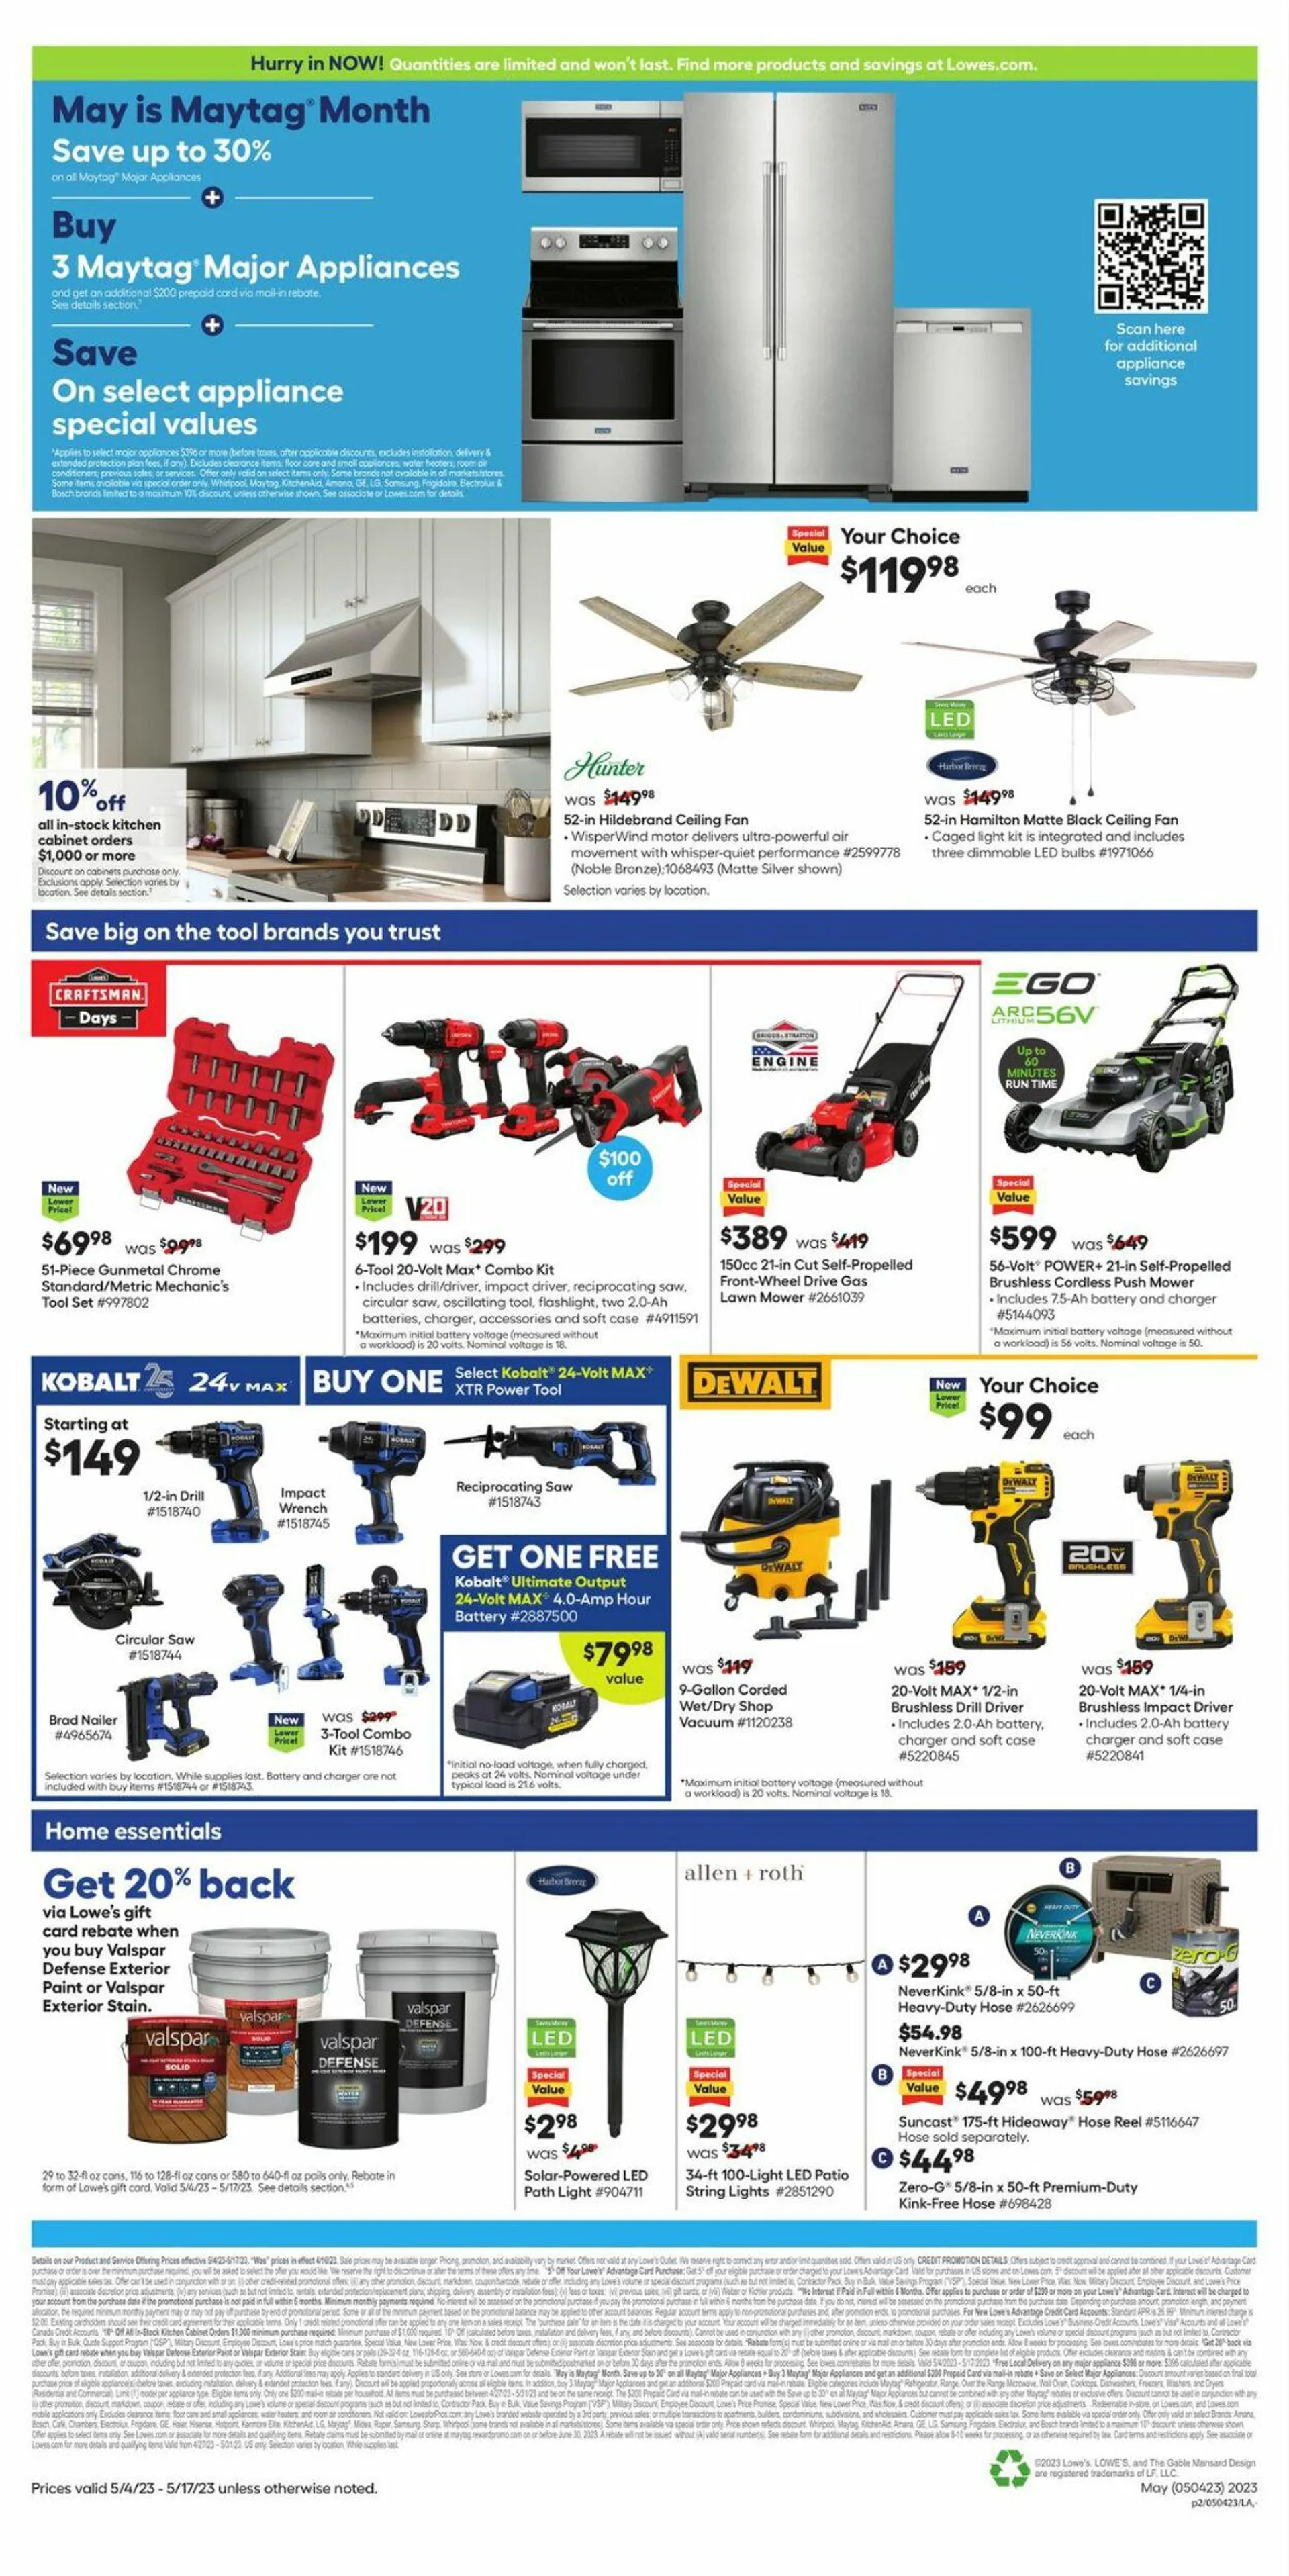 Lowes Current weekly ad - 2